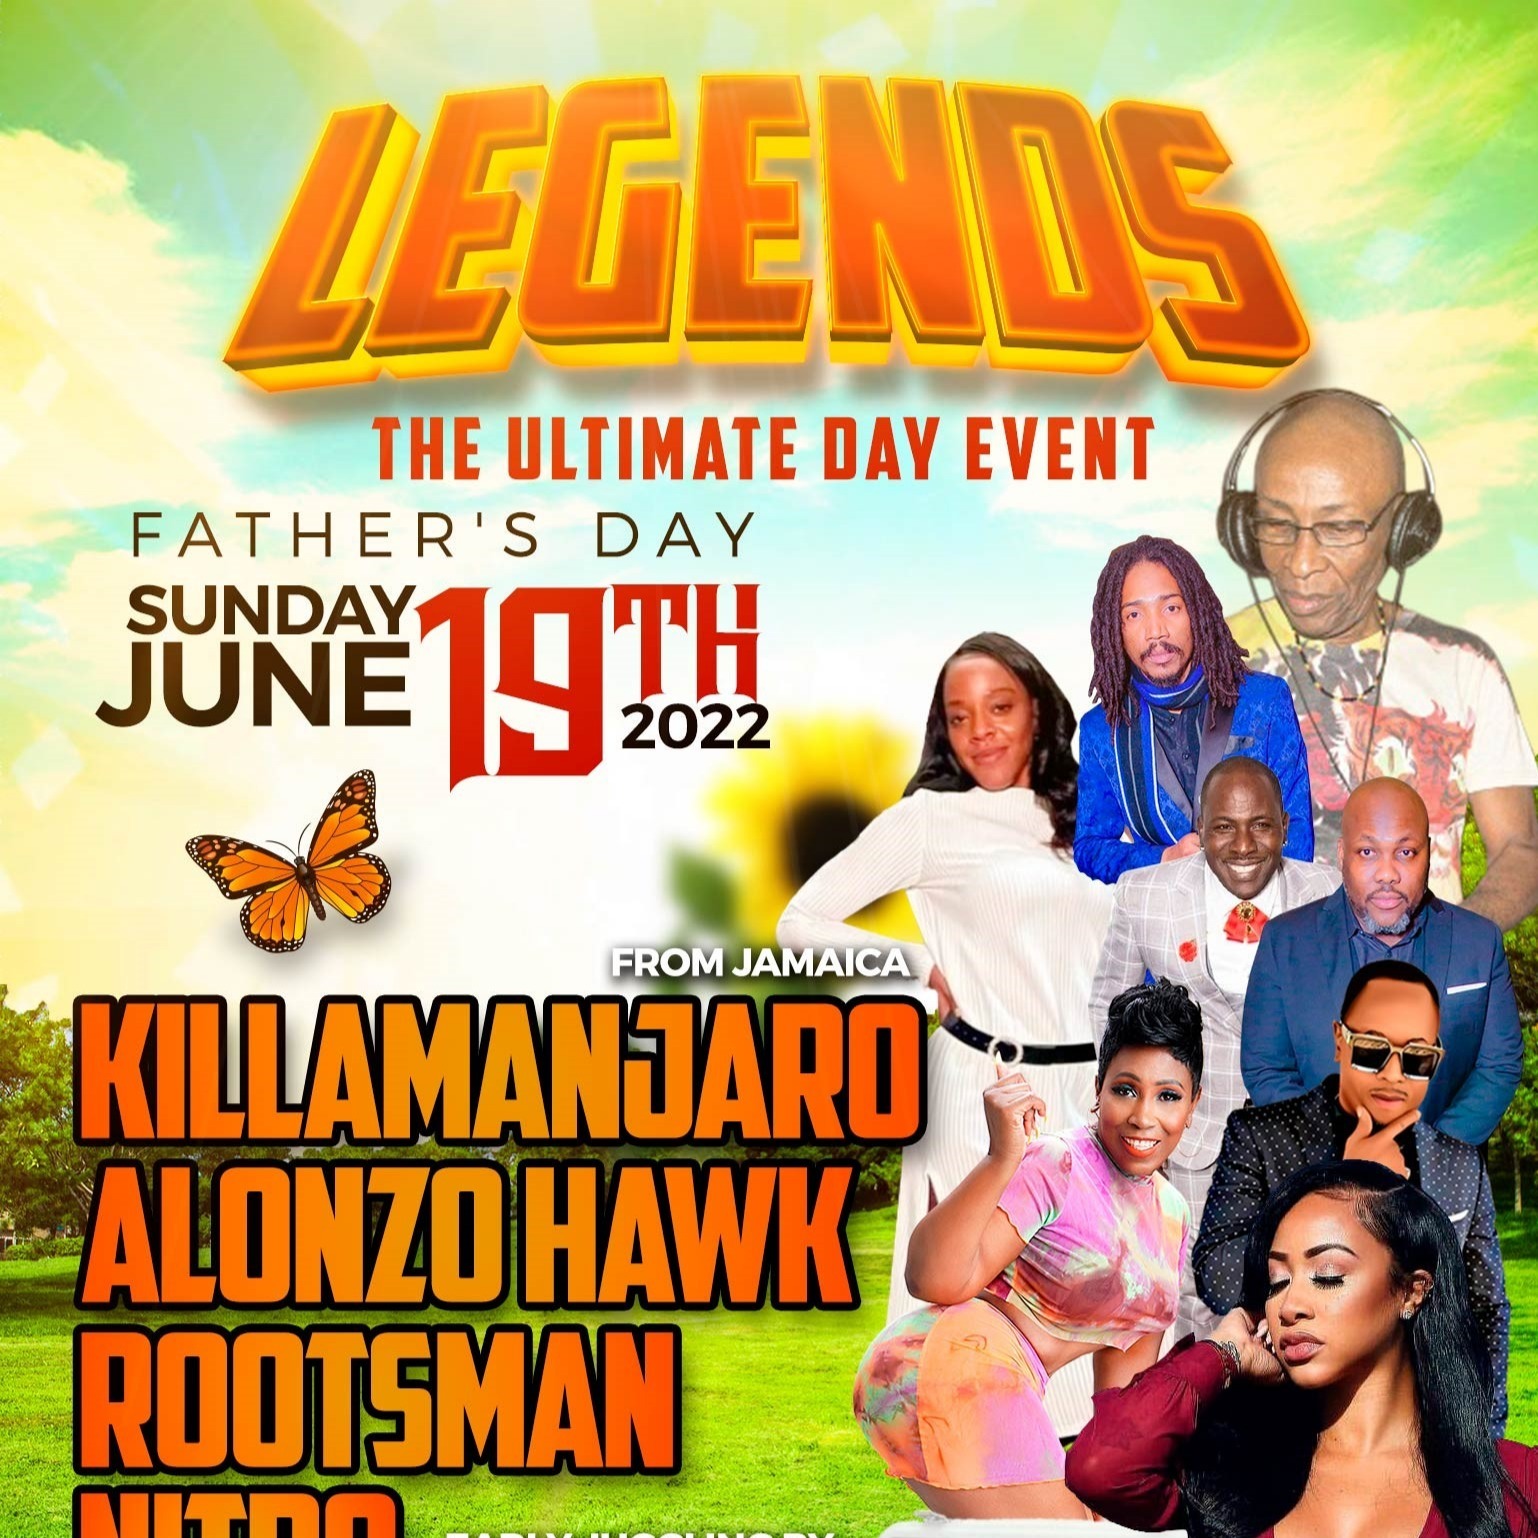 LEGENDS | THE ULTIMATE DAY EVENT 2022